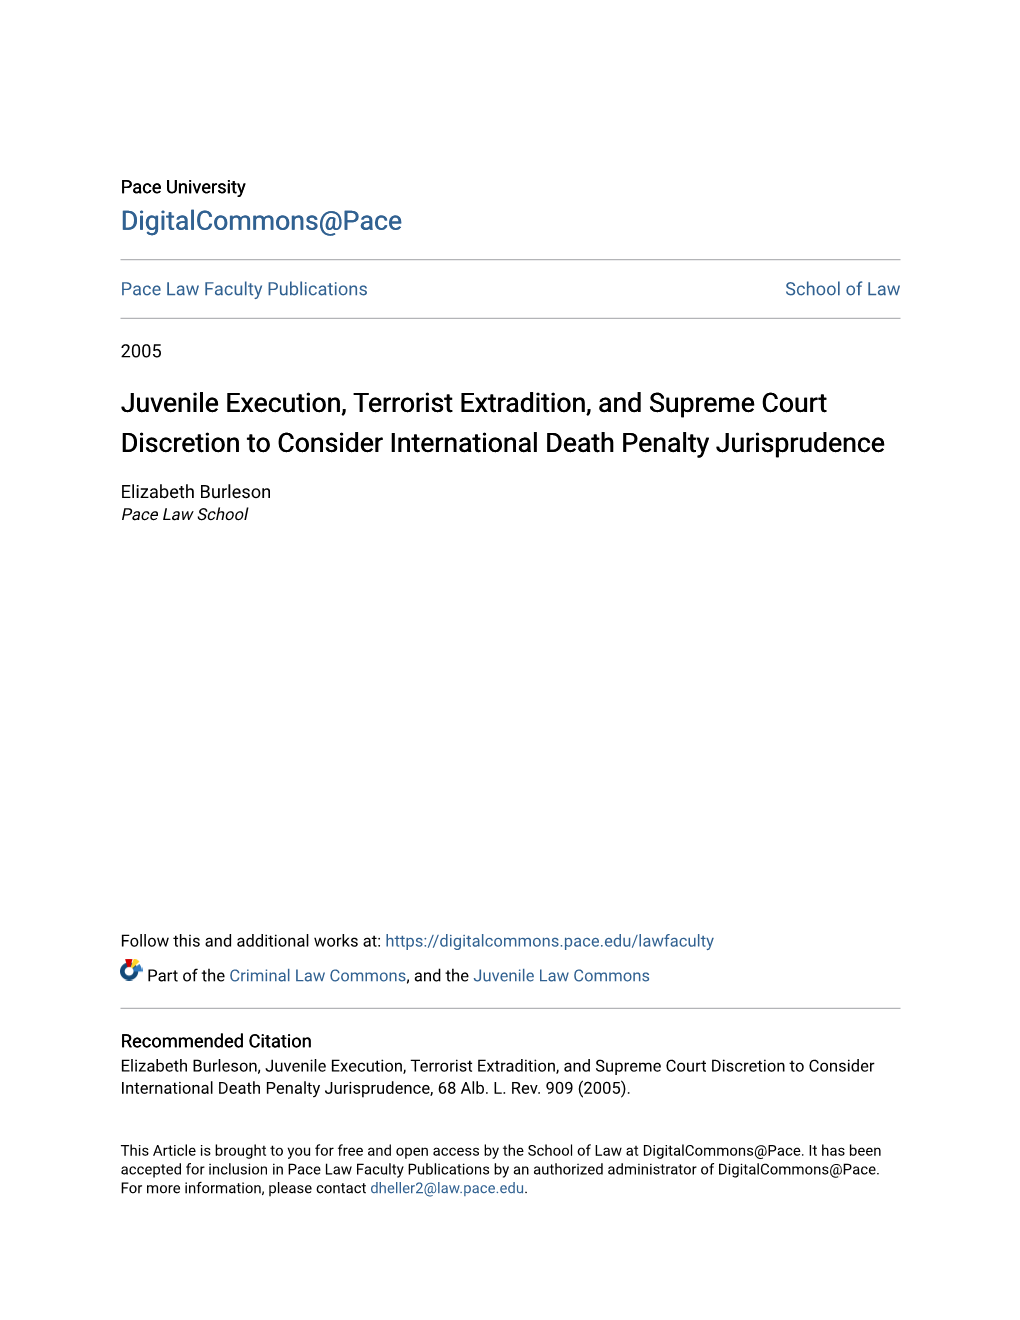 Juvenile Execution, Terrorist Extradition, and Supreme Court Discretion to Consider International Death Penalty Jurisprudence